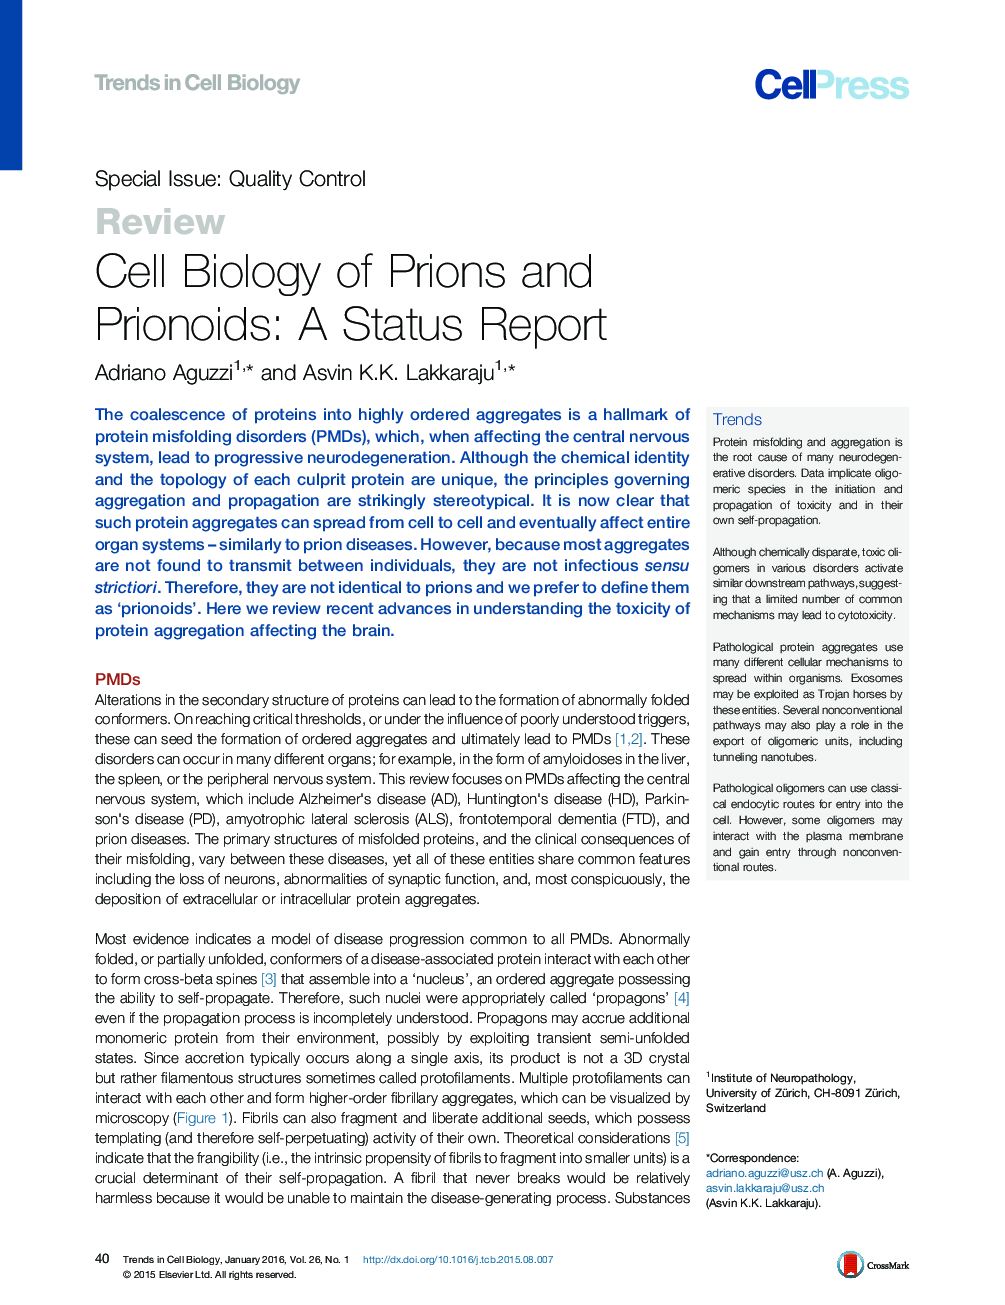 Cell Biology of Prions and Prionoids: A Status Report